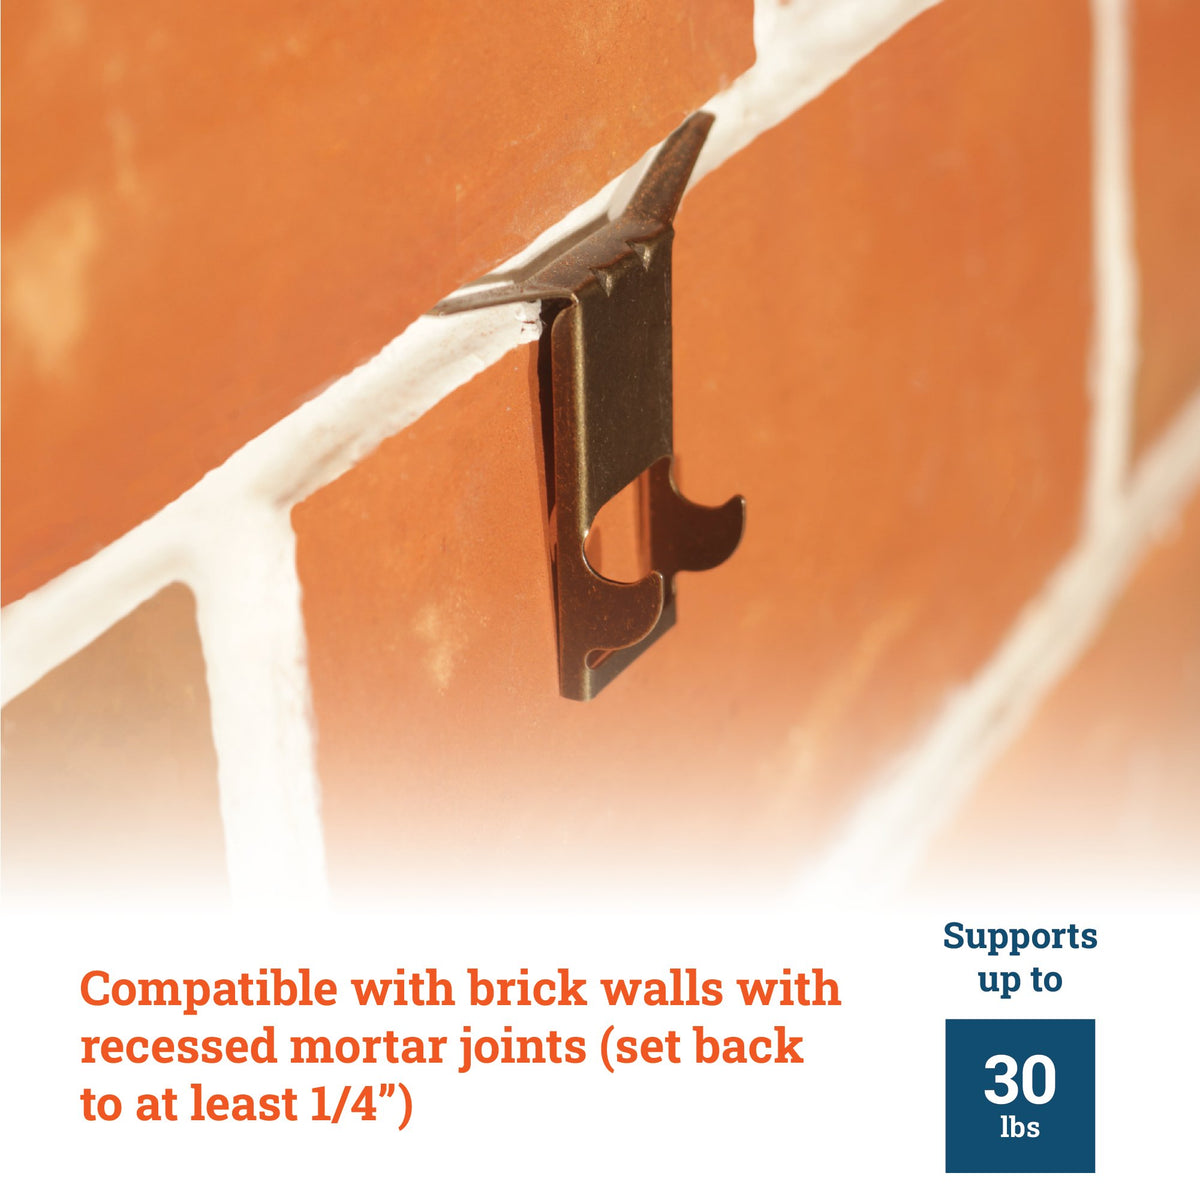 Brick Clips - HWR-216 - Picture Hang Solutions